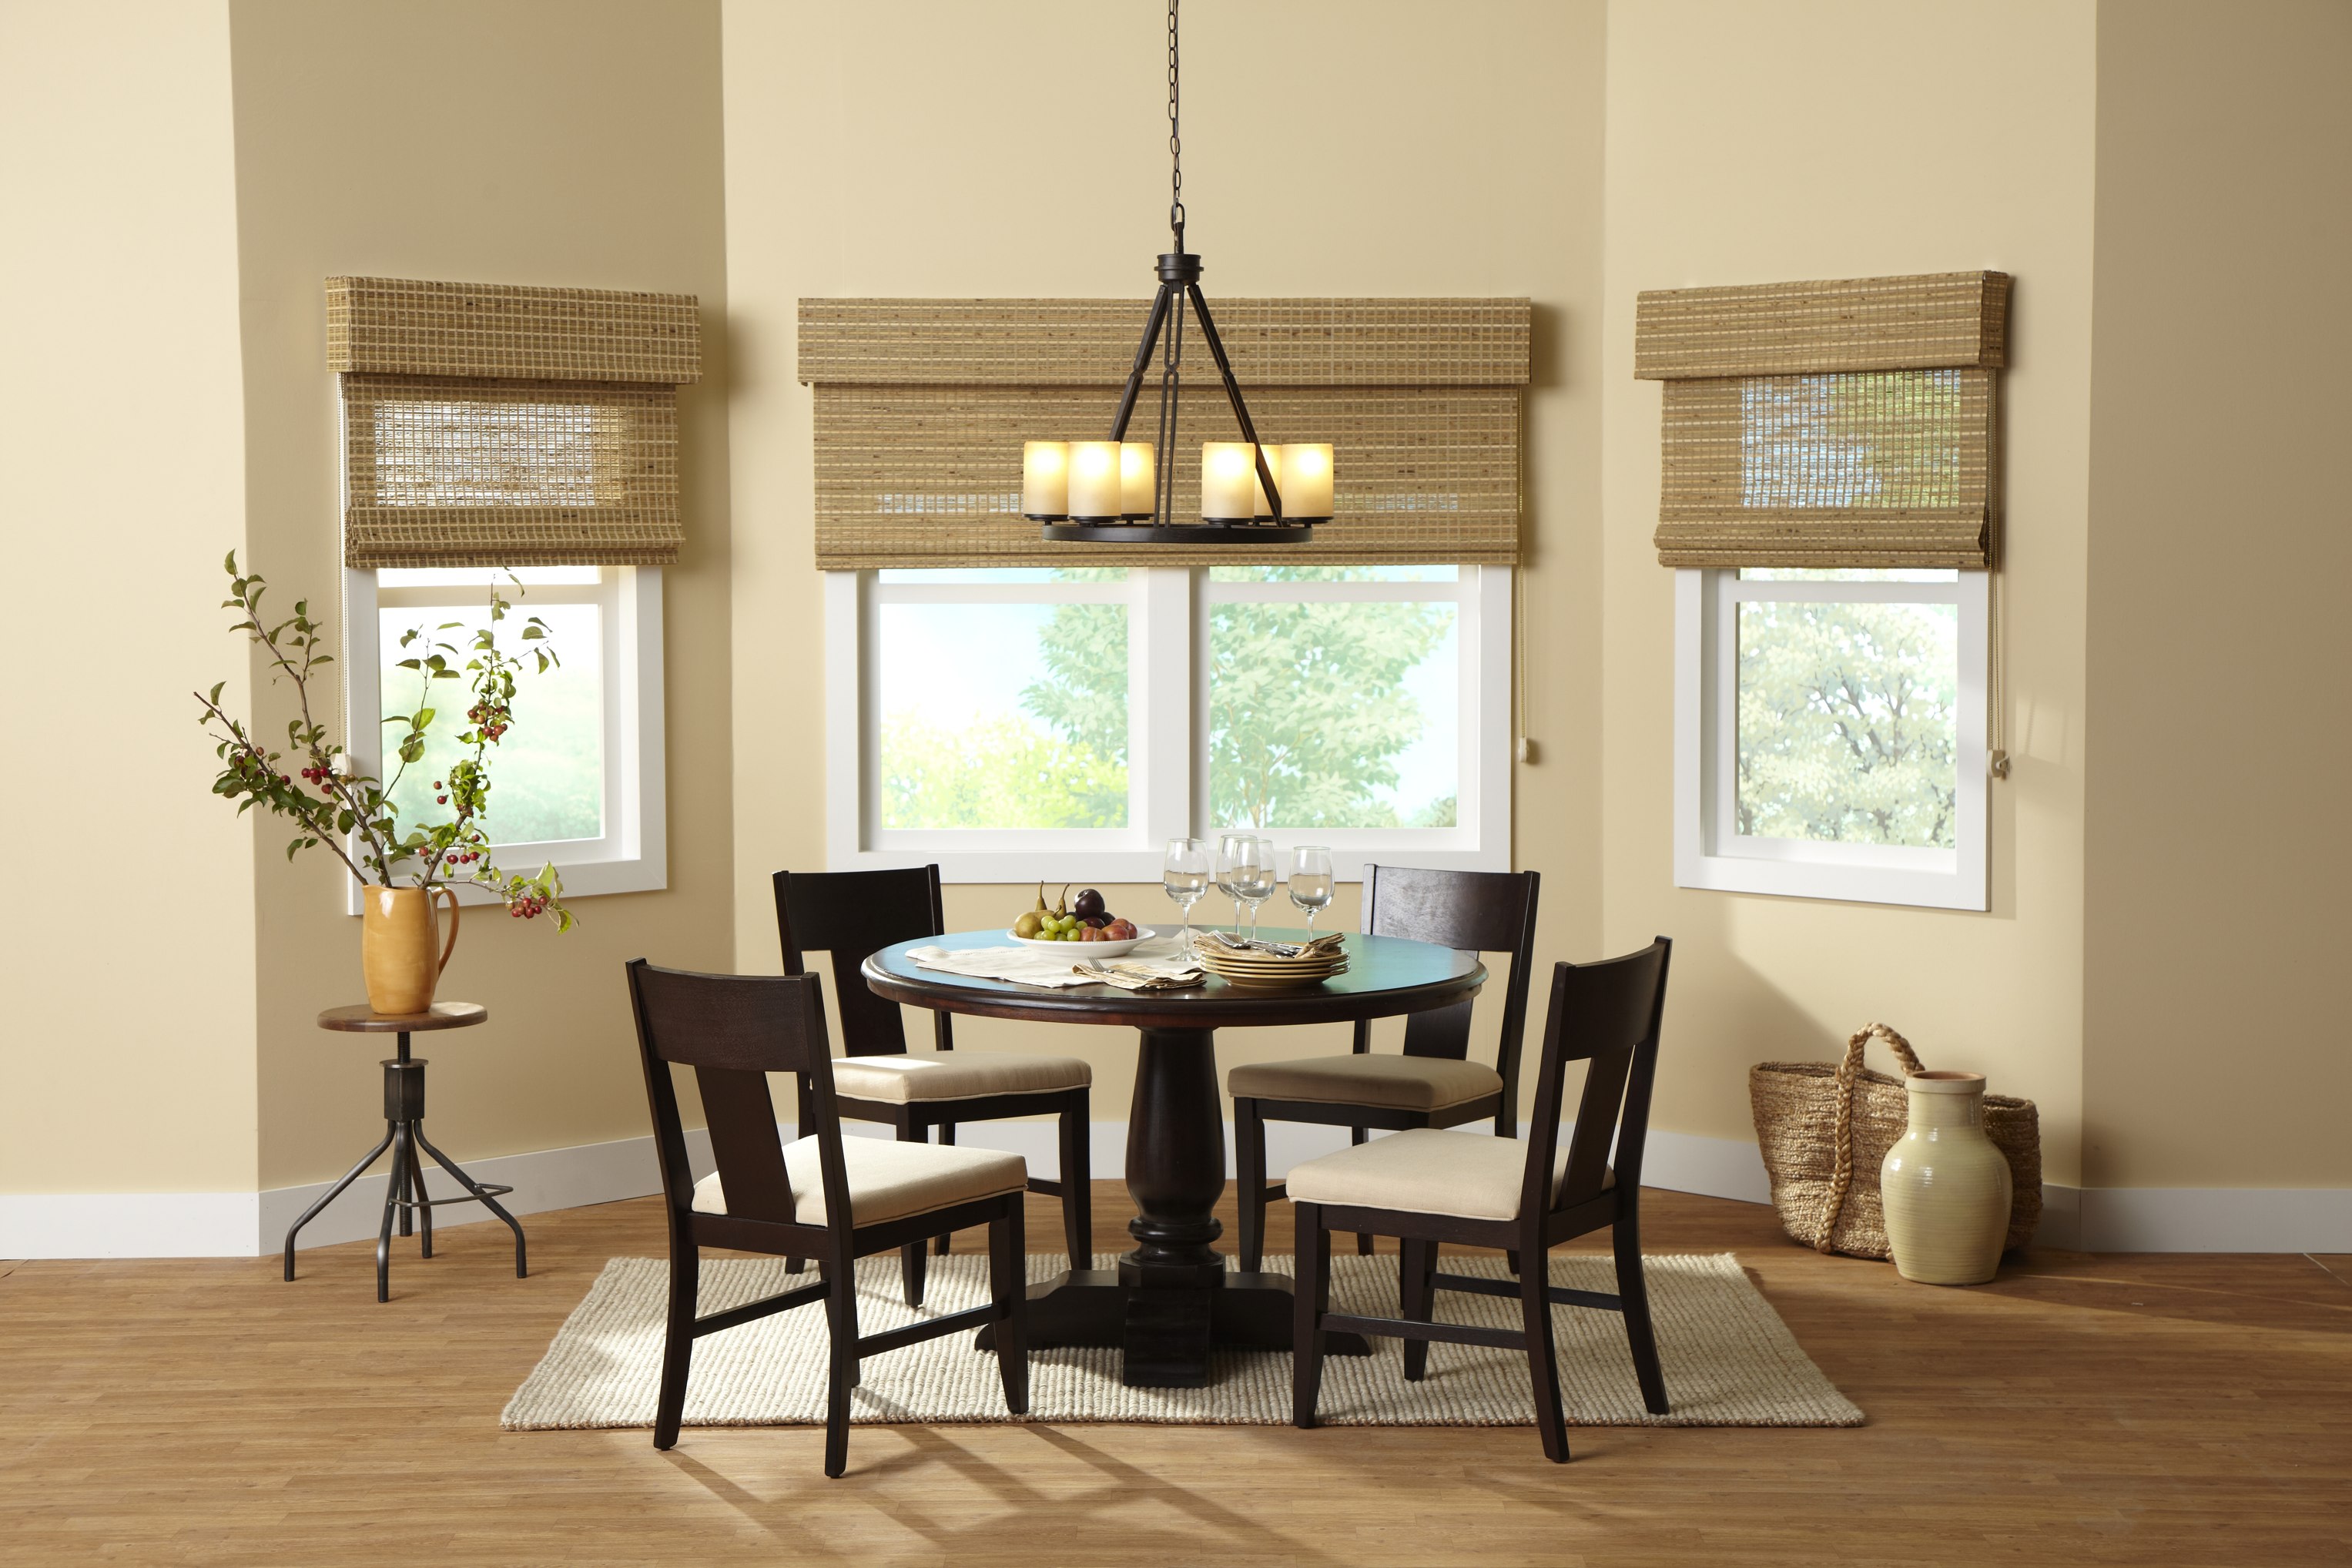 Levolor Natural Shades Spa Cove Collection with a soft flat bamboo feel.